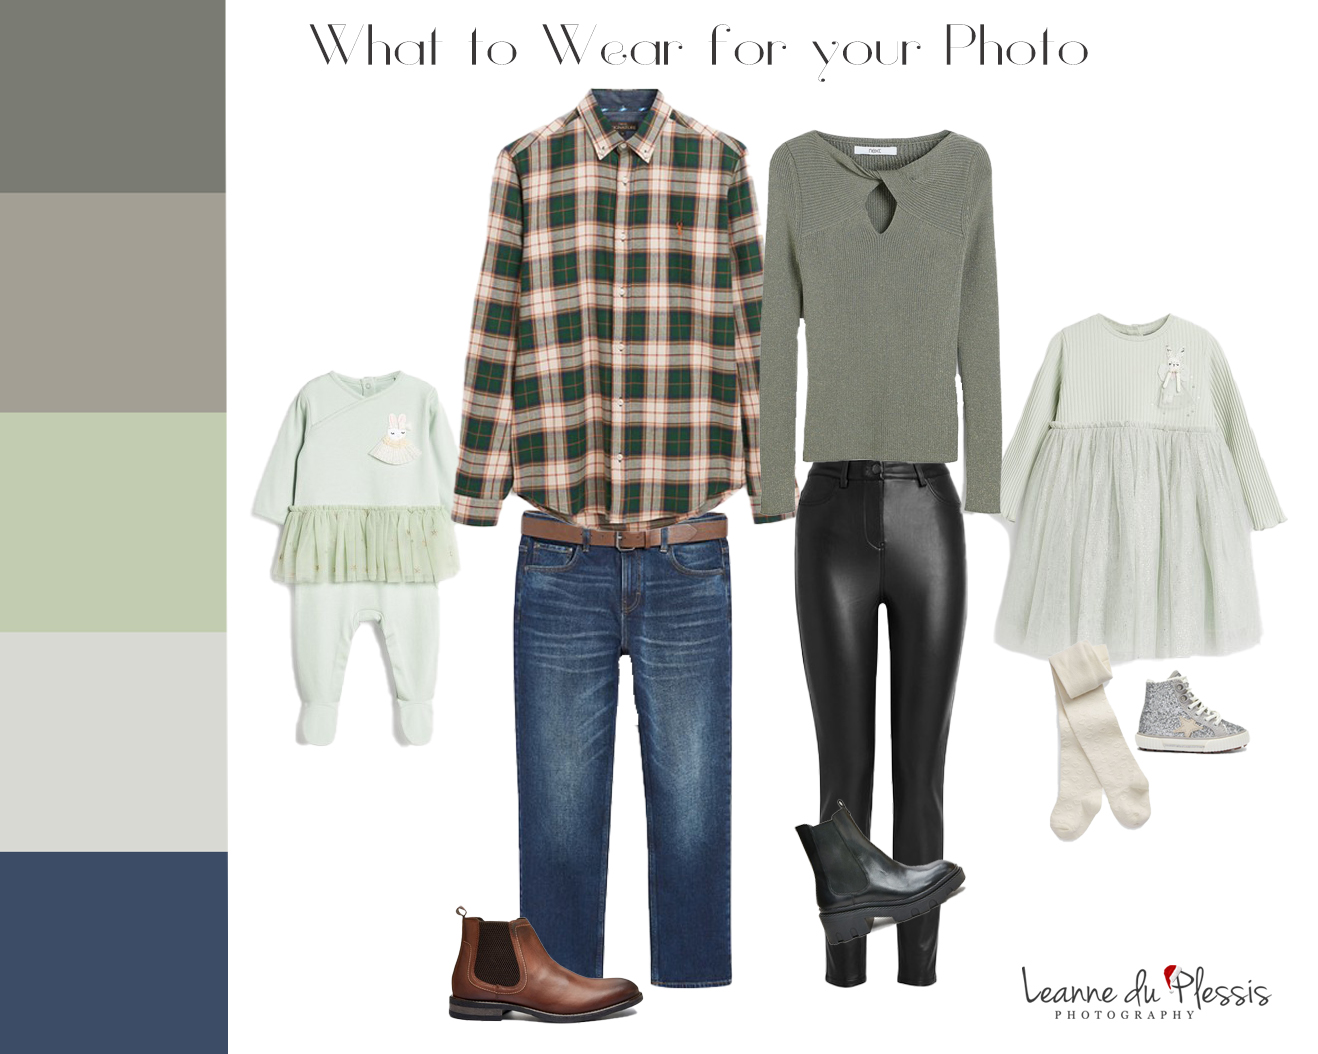 Leanne du Plessis Photography - What to Wear - greens